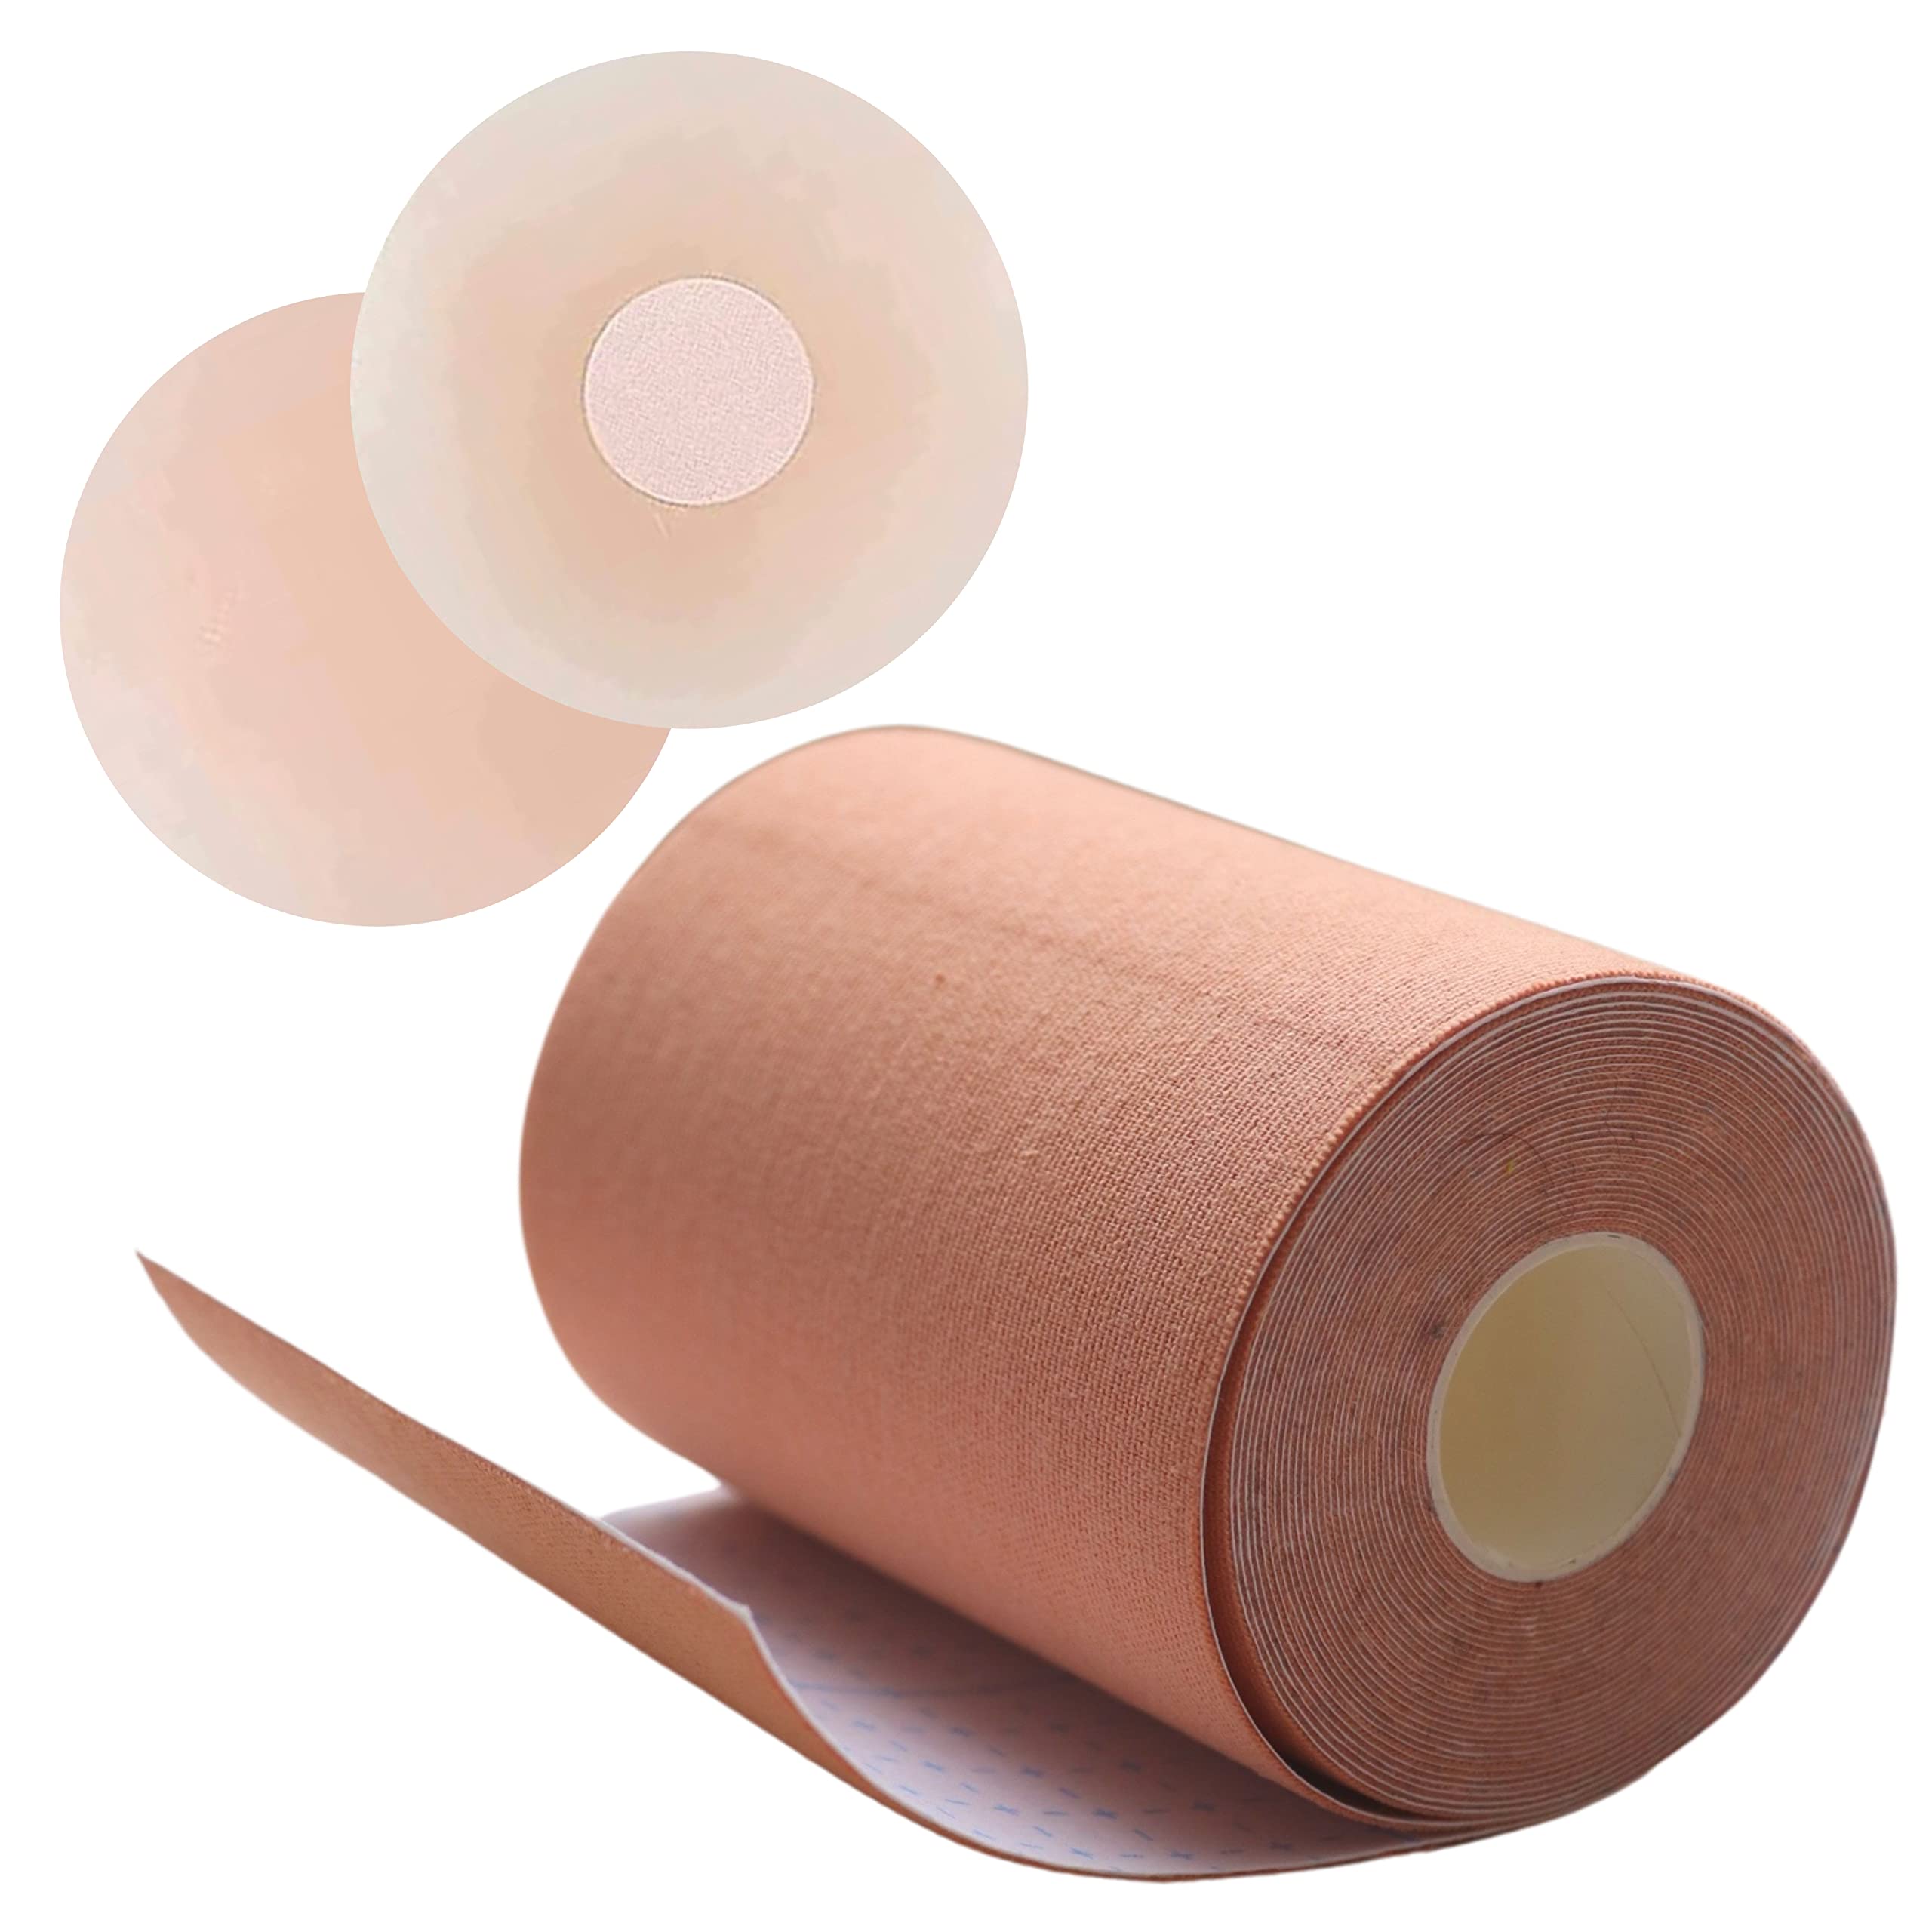 Boob Tape, Adhesive Breast Tape - Boobytape for Breast Lift, Sticky Boobs  Adhesive Tape - Invisible Fashion Tape for All Cup Sizes, Body Tape for